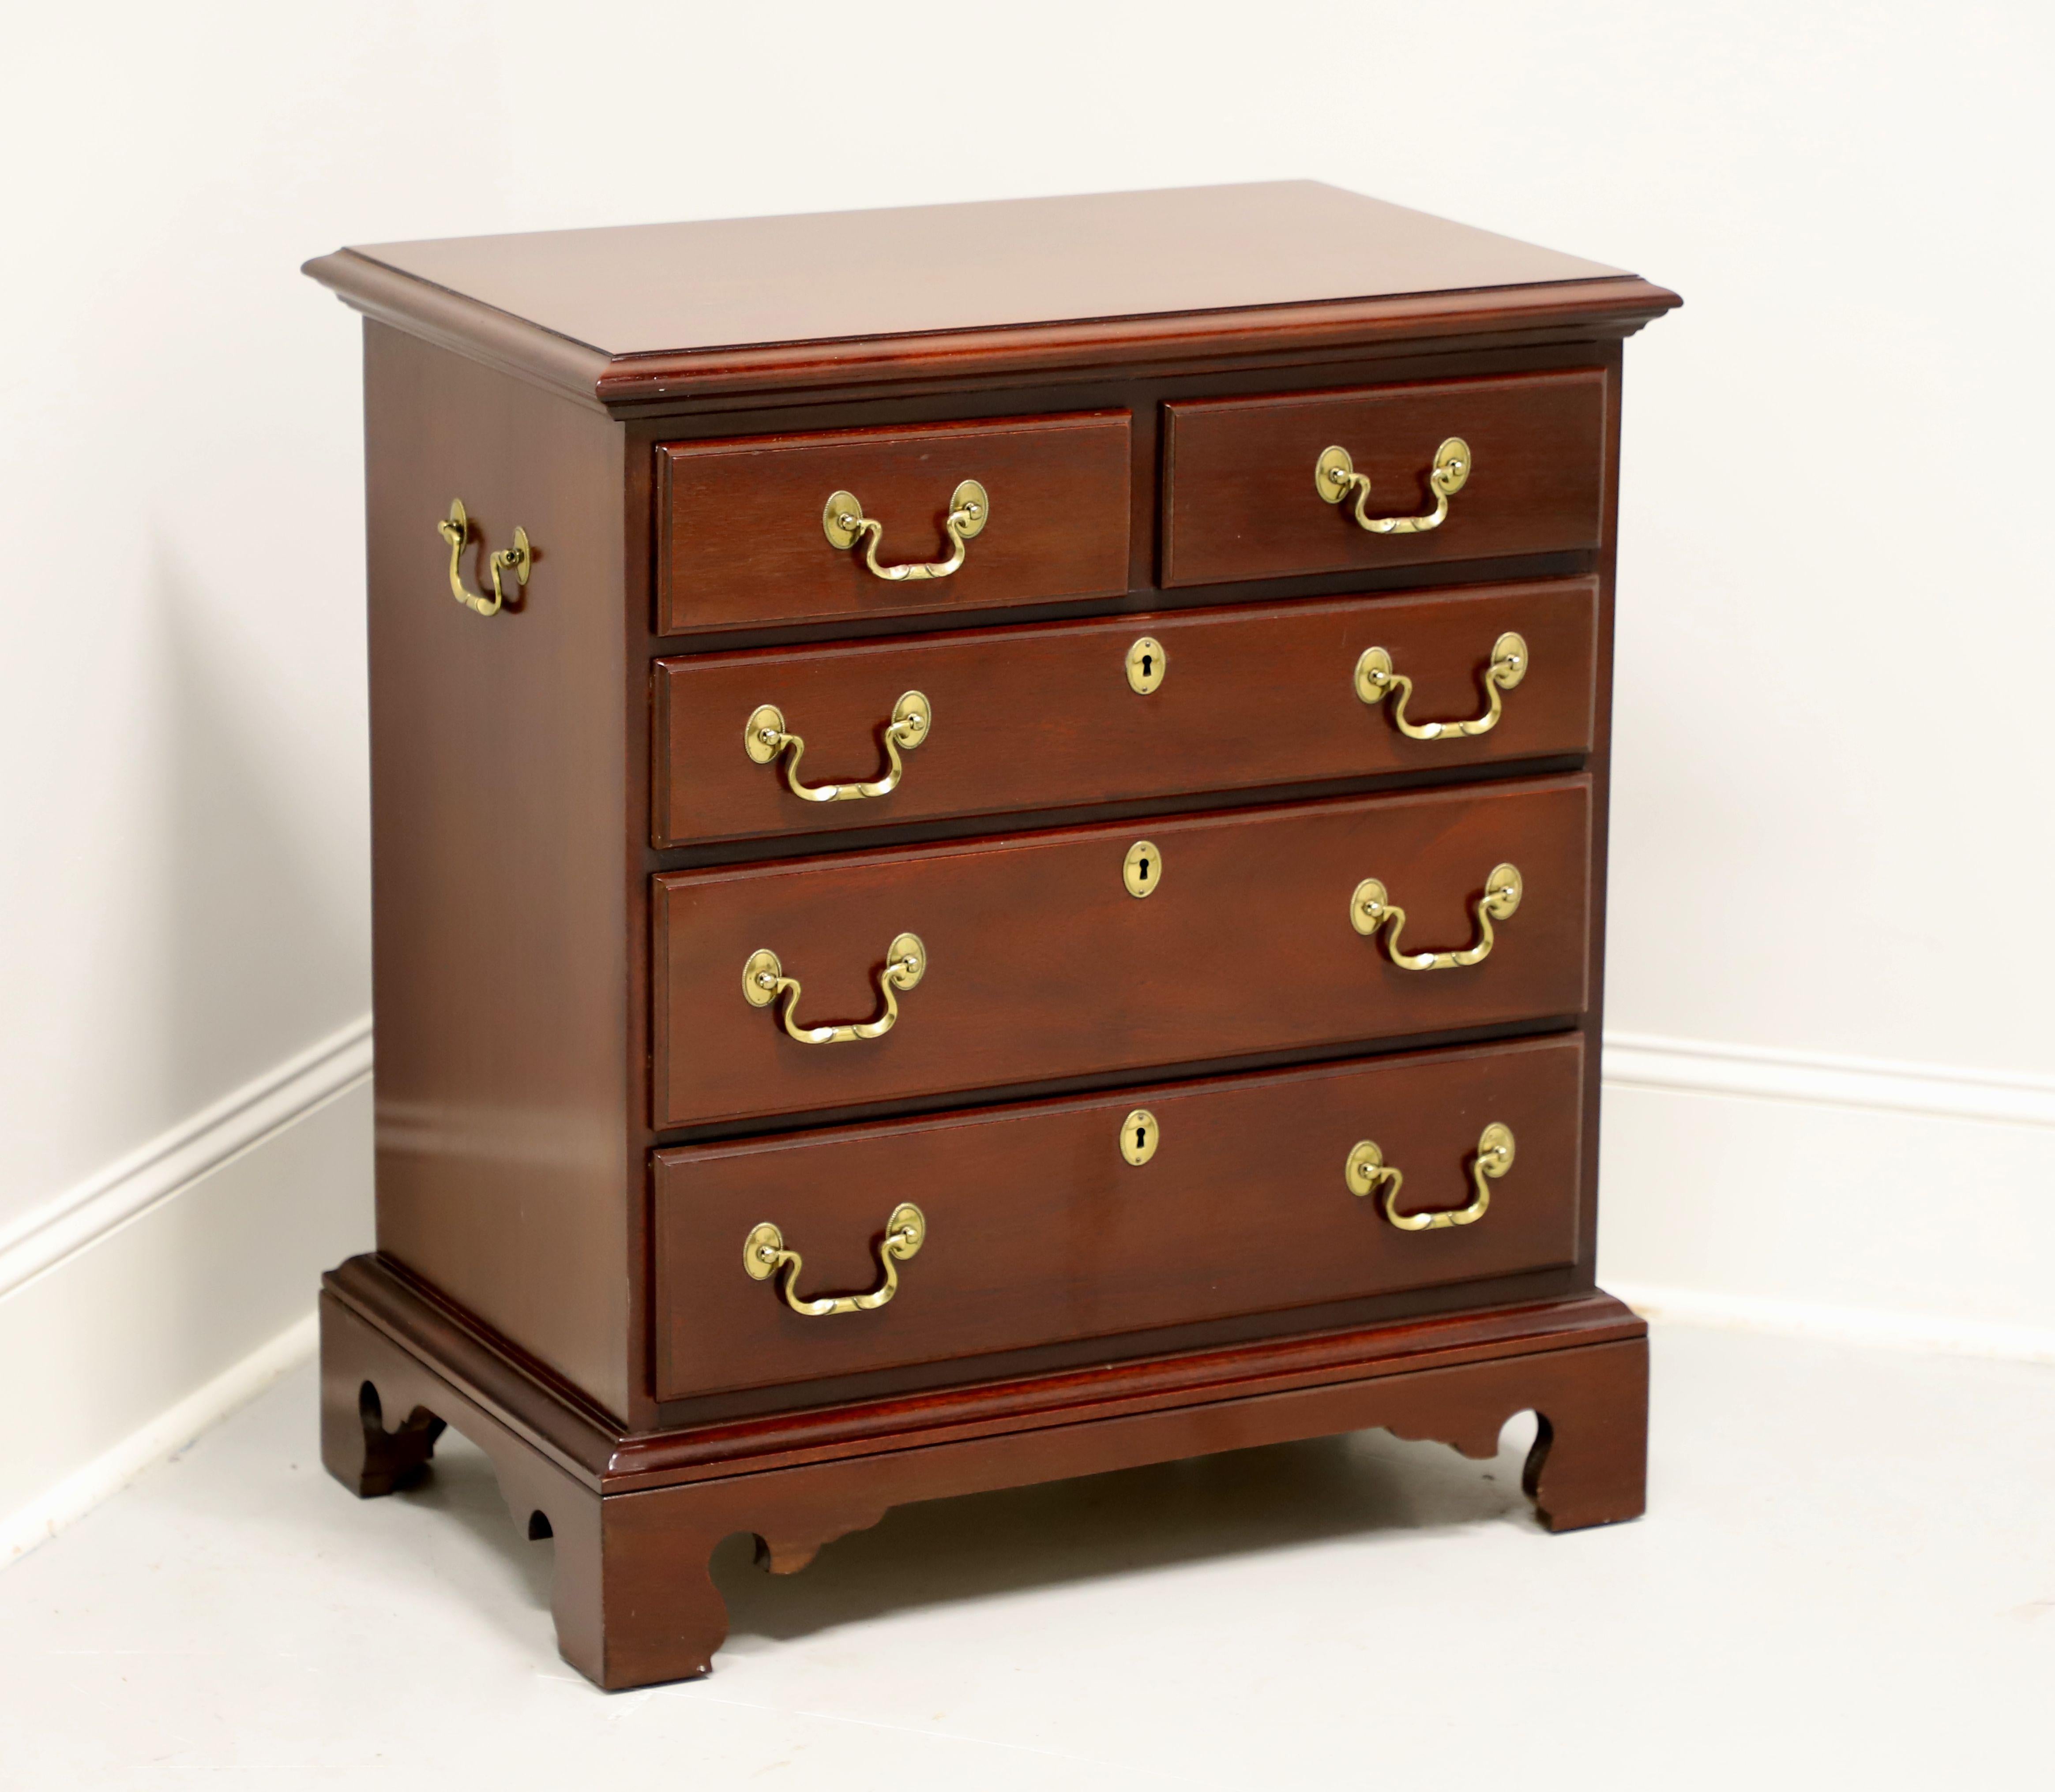 LINK-TAYLOR Heirloom Planters Solid Mahogany Chippendale Bedside Chest - A 4